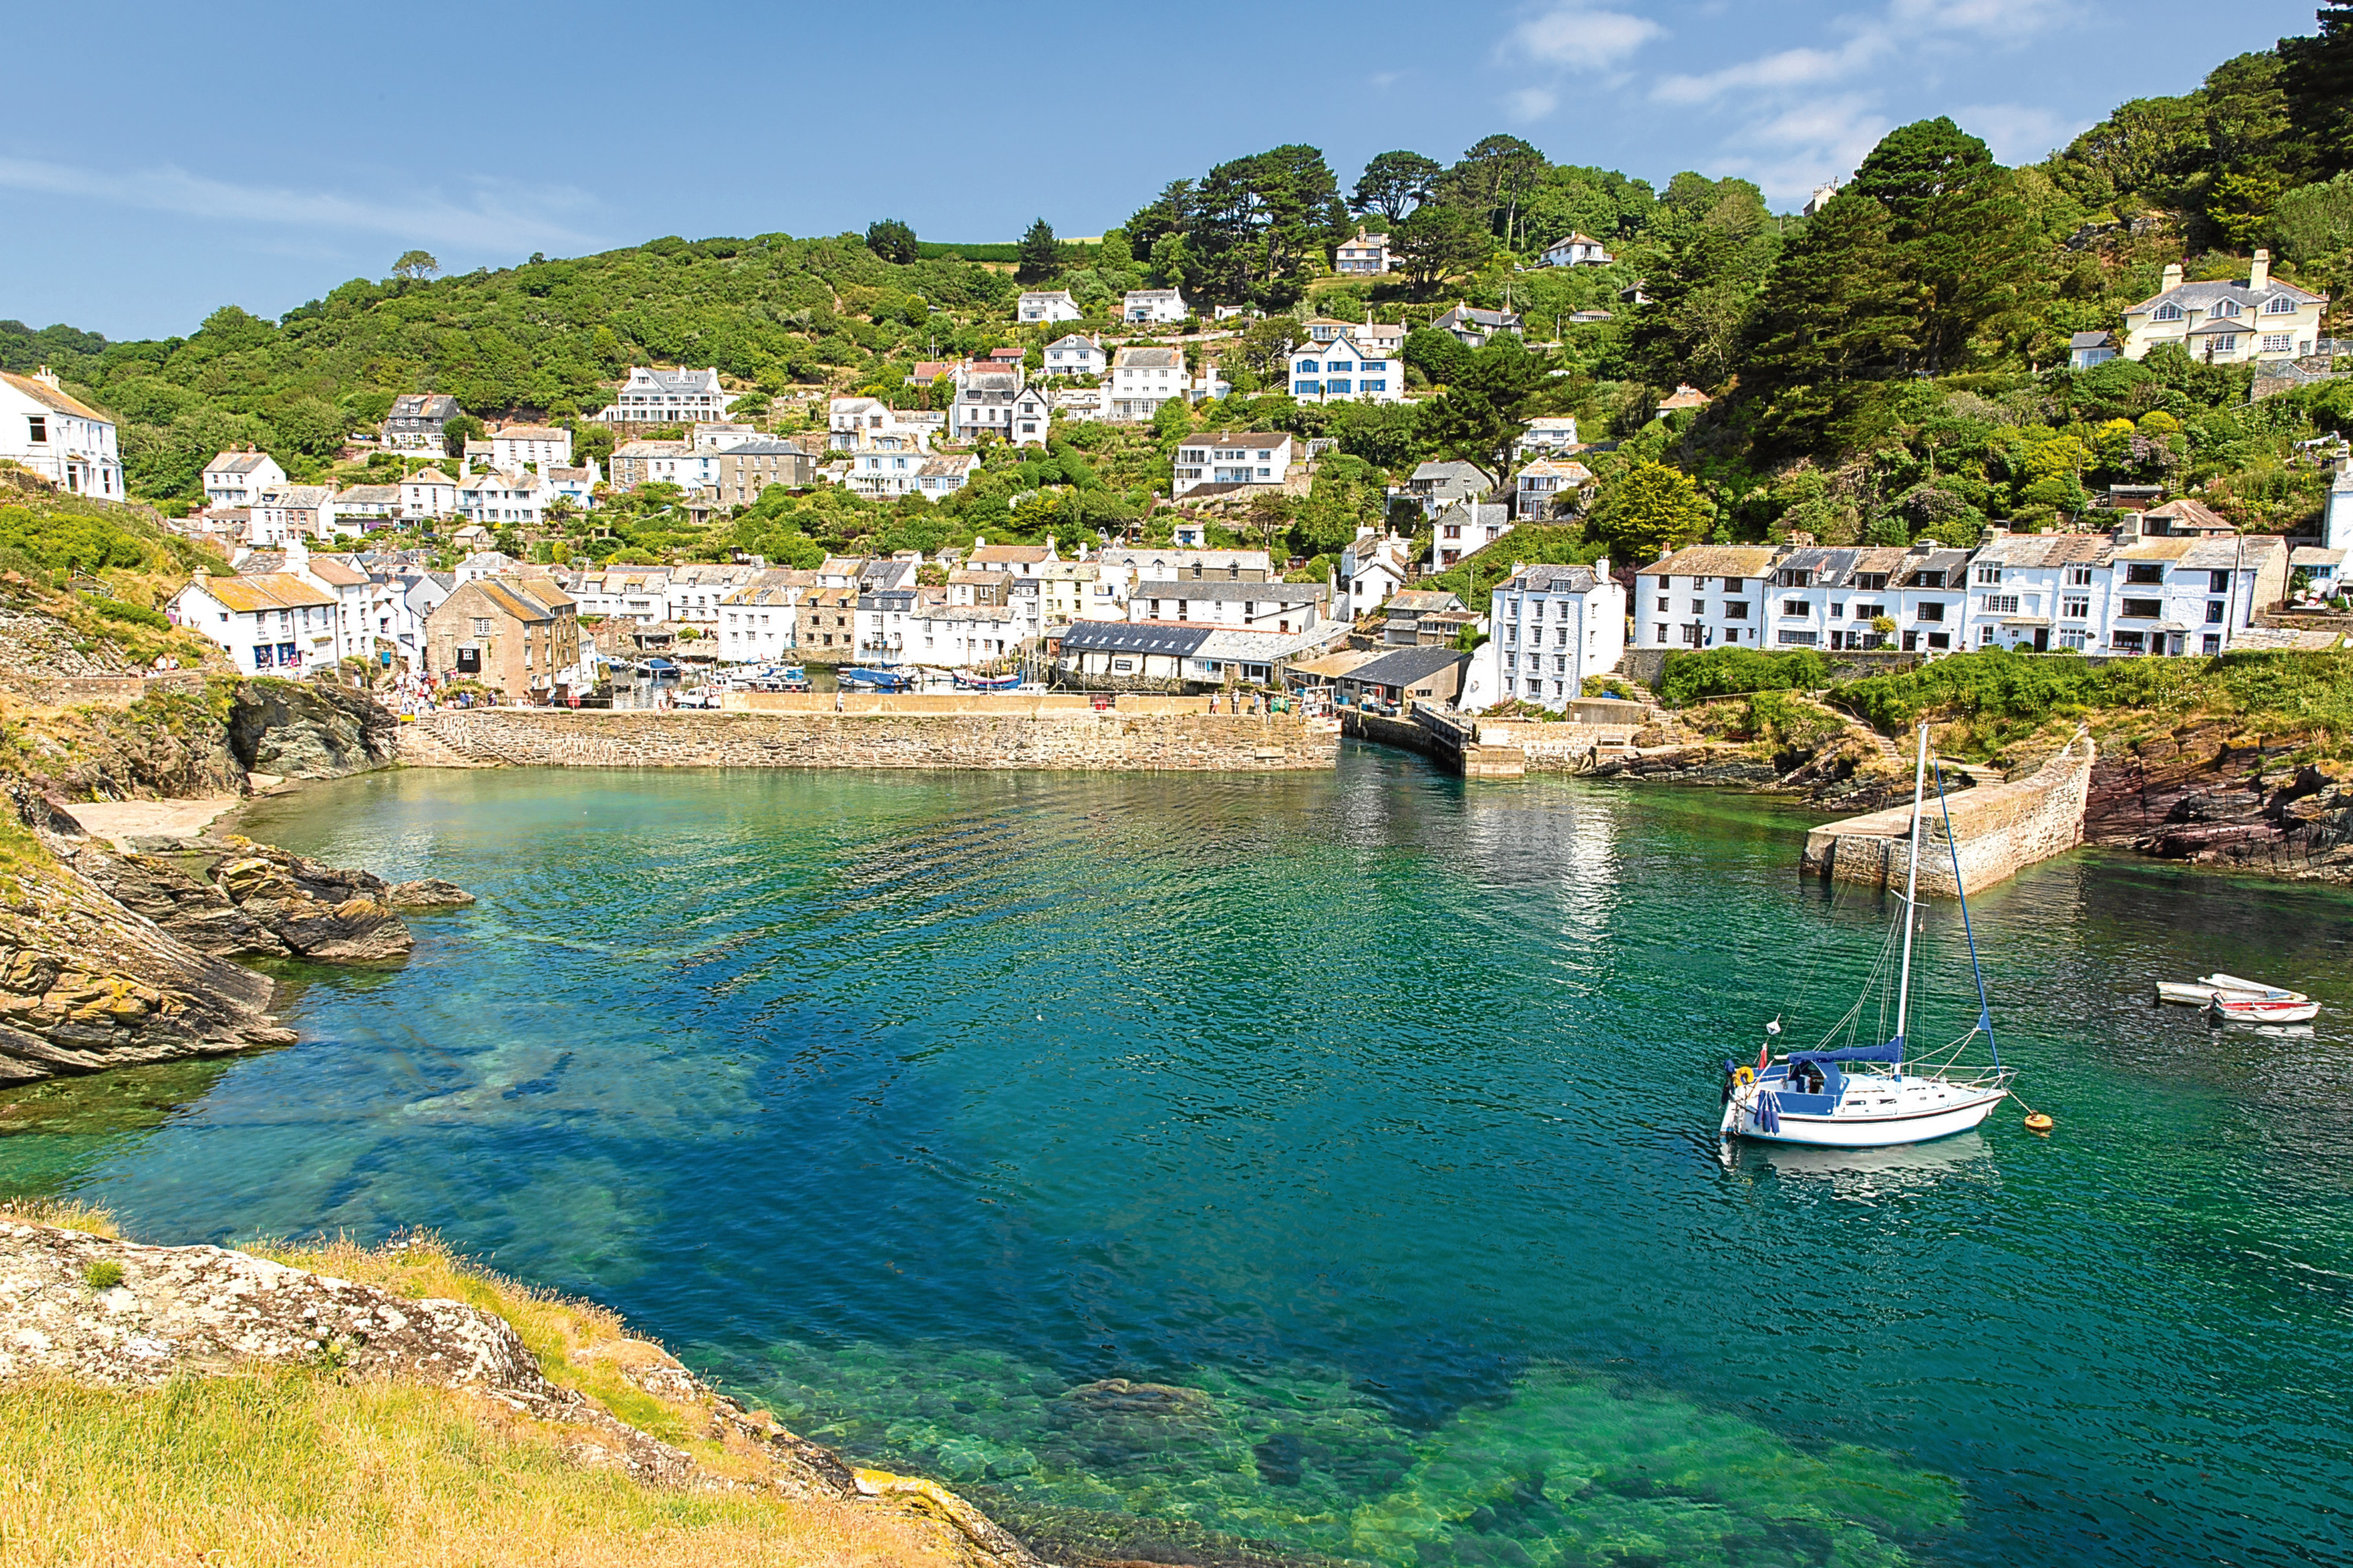 Cornwall (iStock/Getty Images)